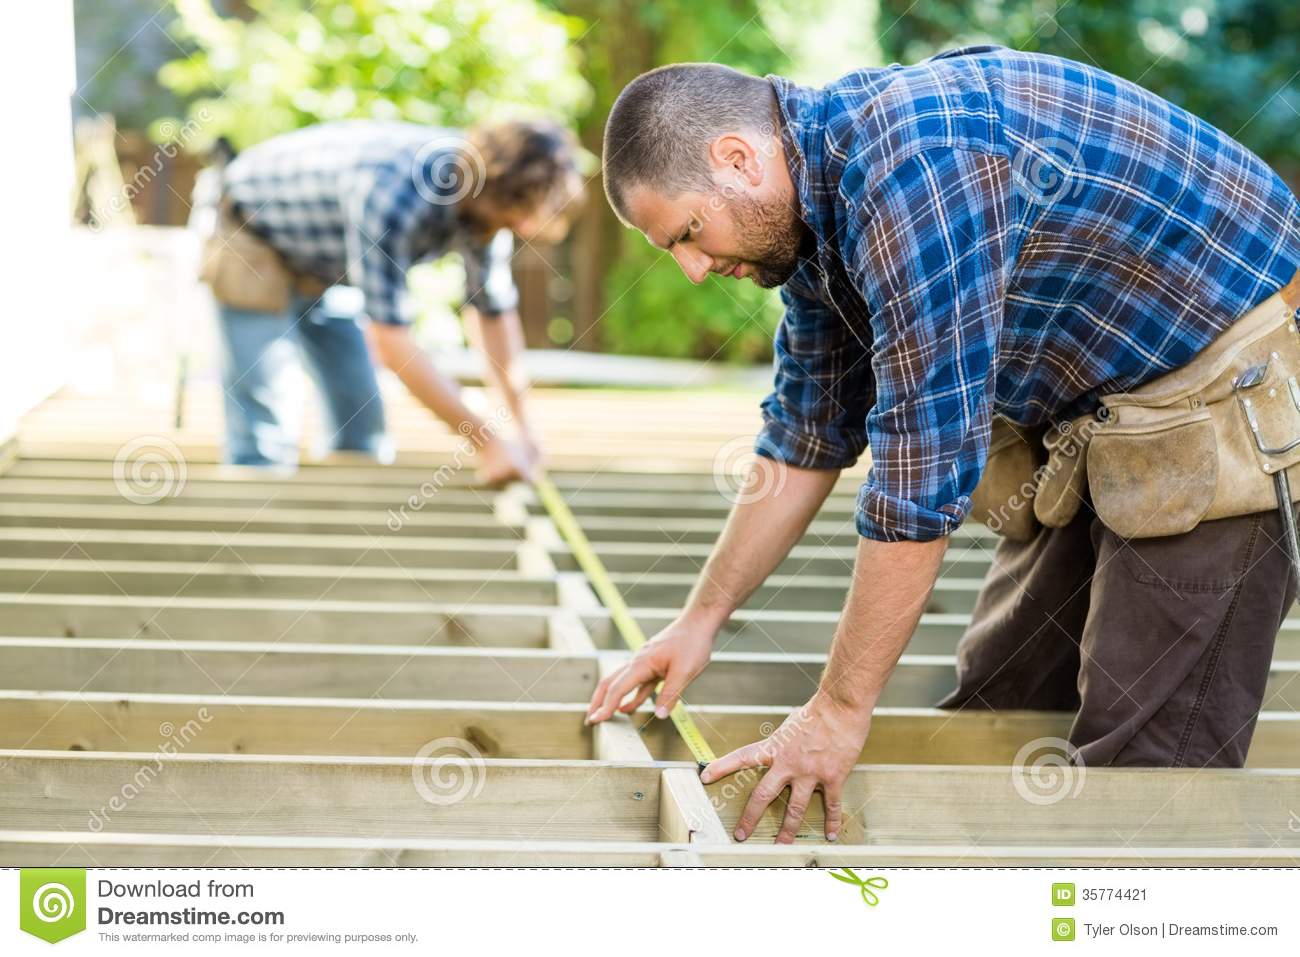 Carpenters Measuring Wood With Tape At Stock Image   Image  35774421